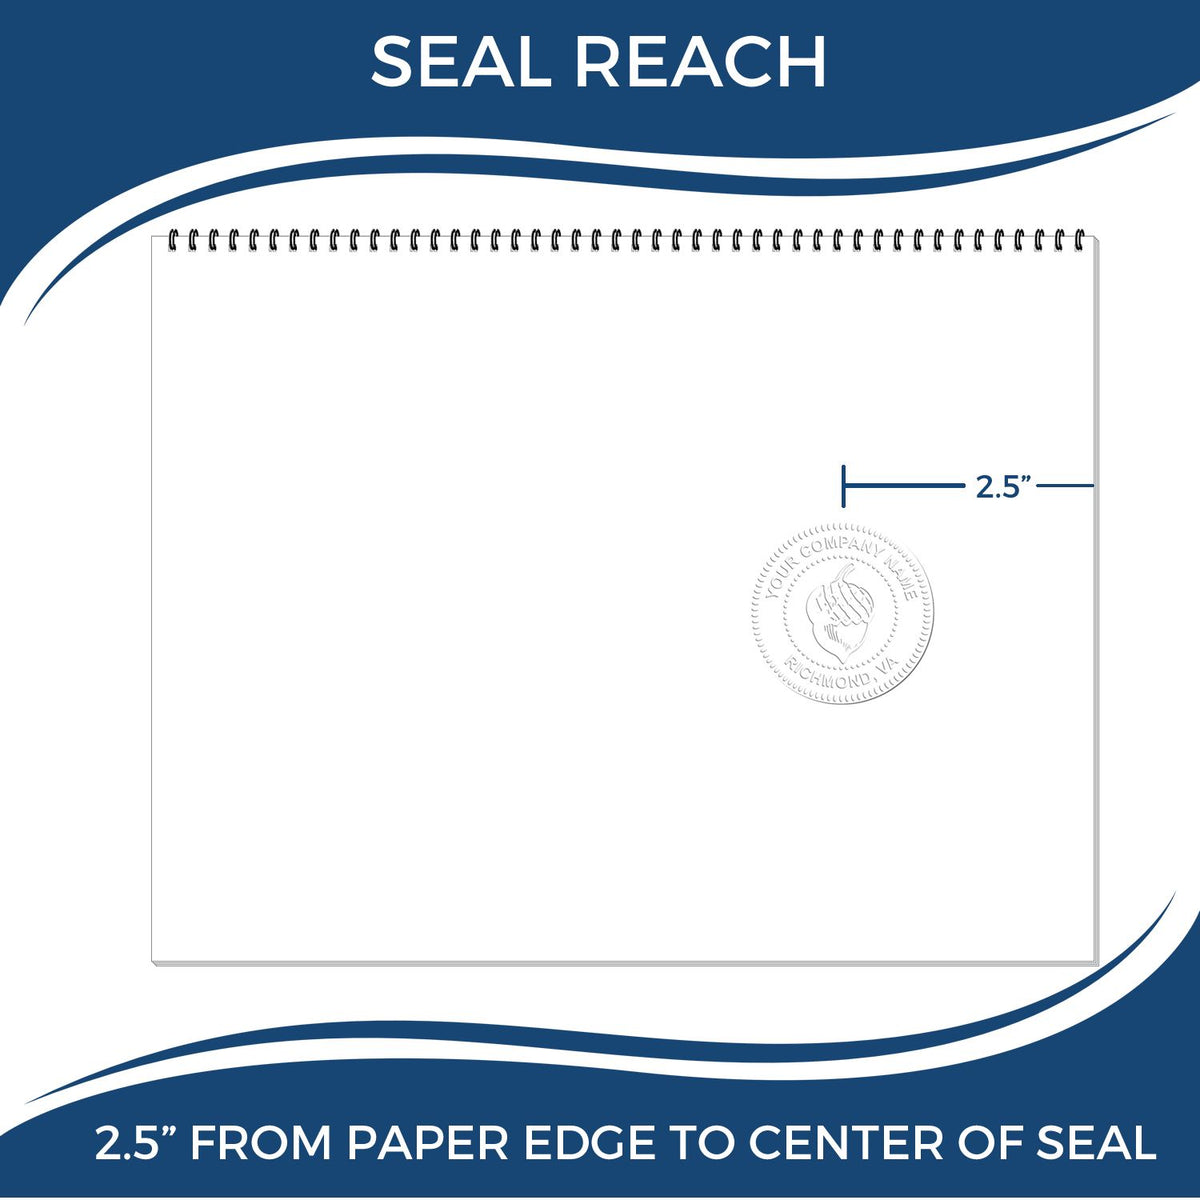 An infographic showing the seal reach which is represented by a ruler and a miniature seal image of the Heavy Duty Cast Iron Maryland Geologist Seal Embosser